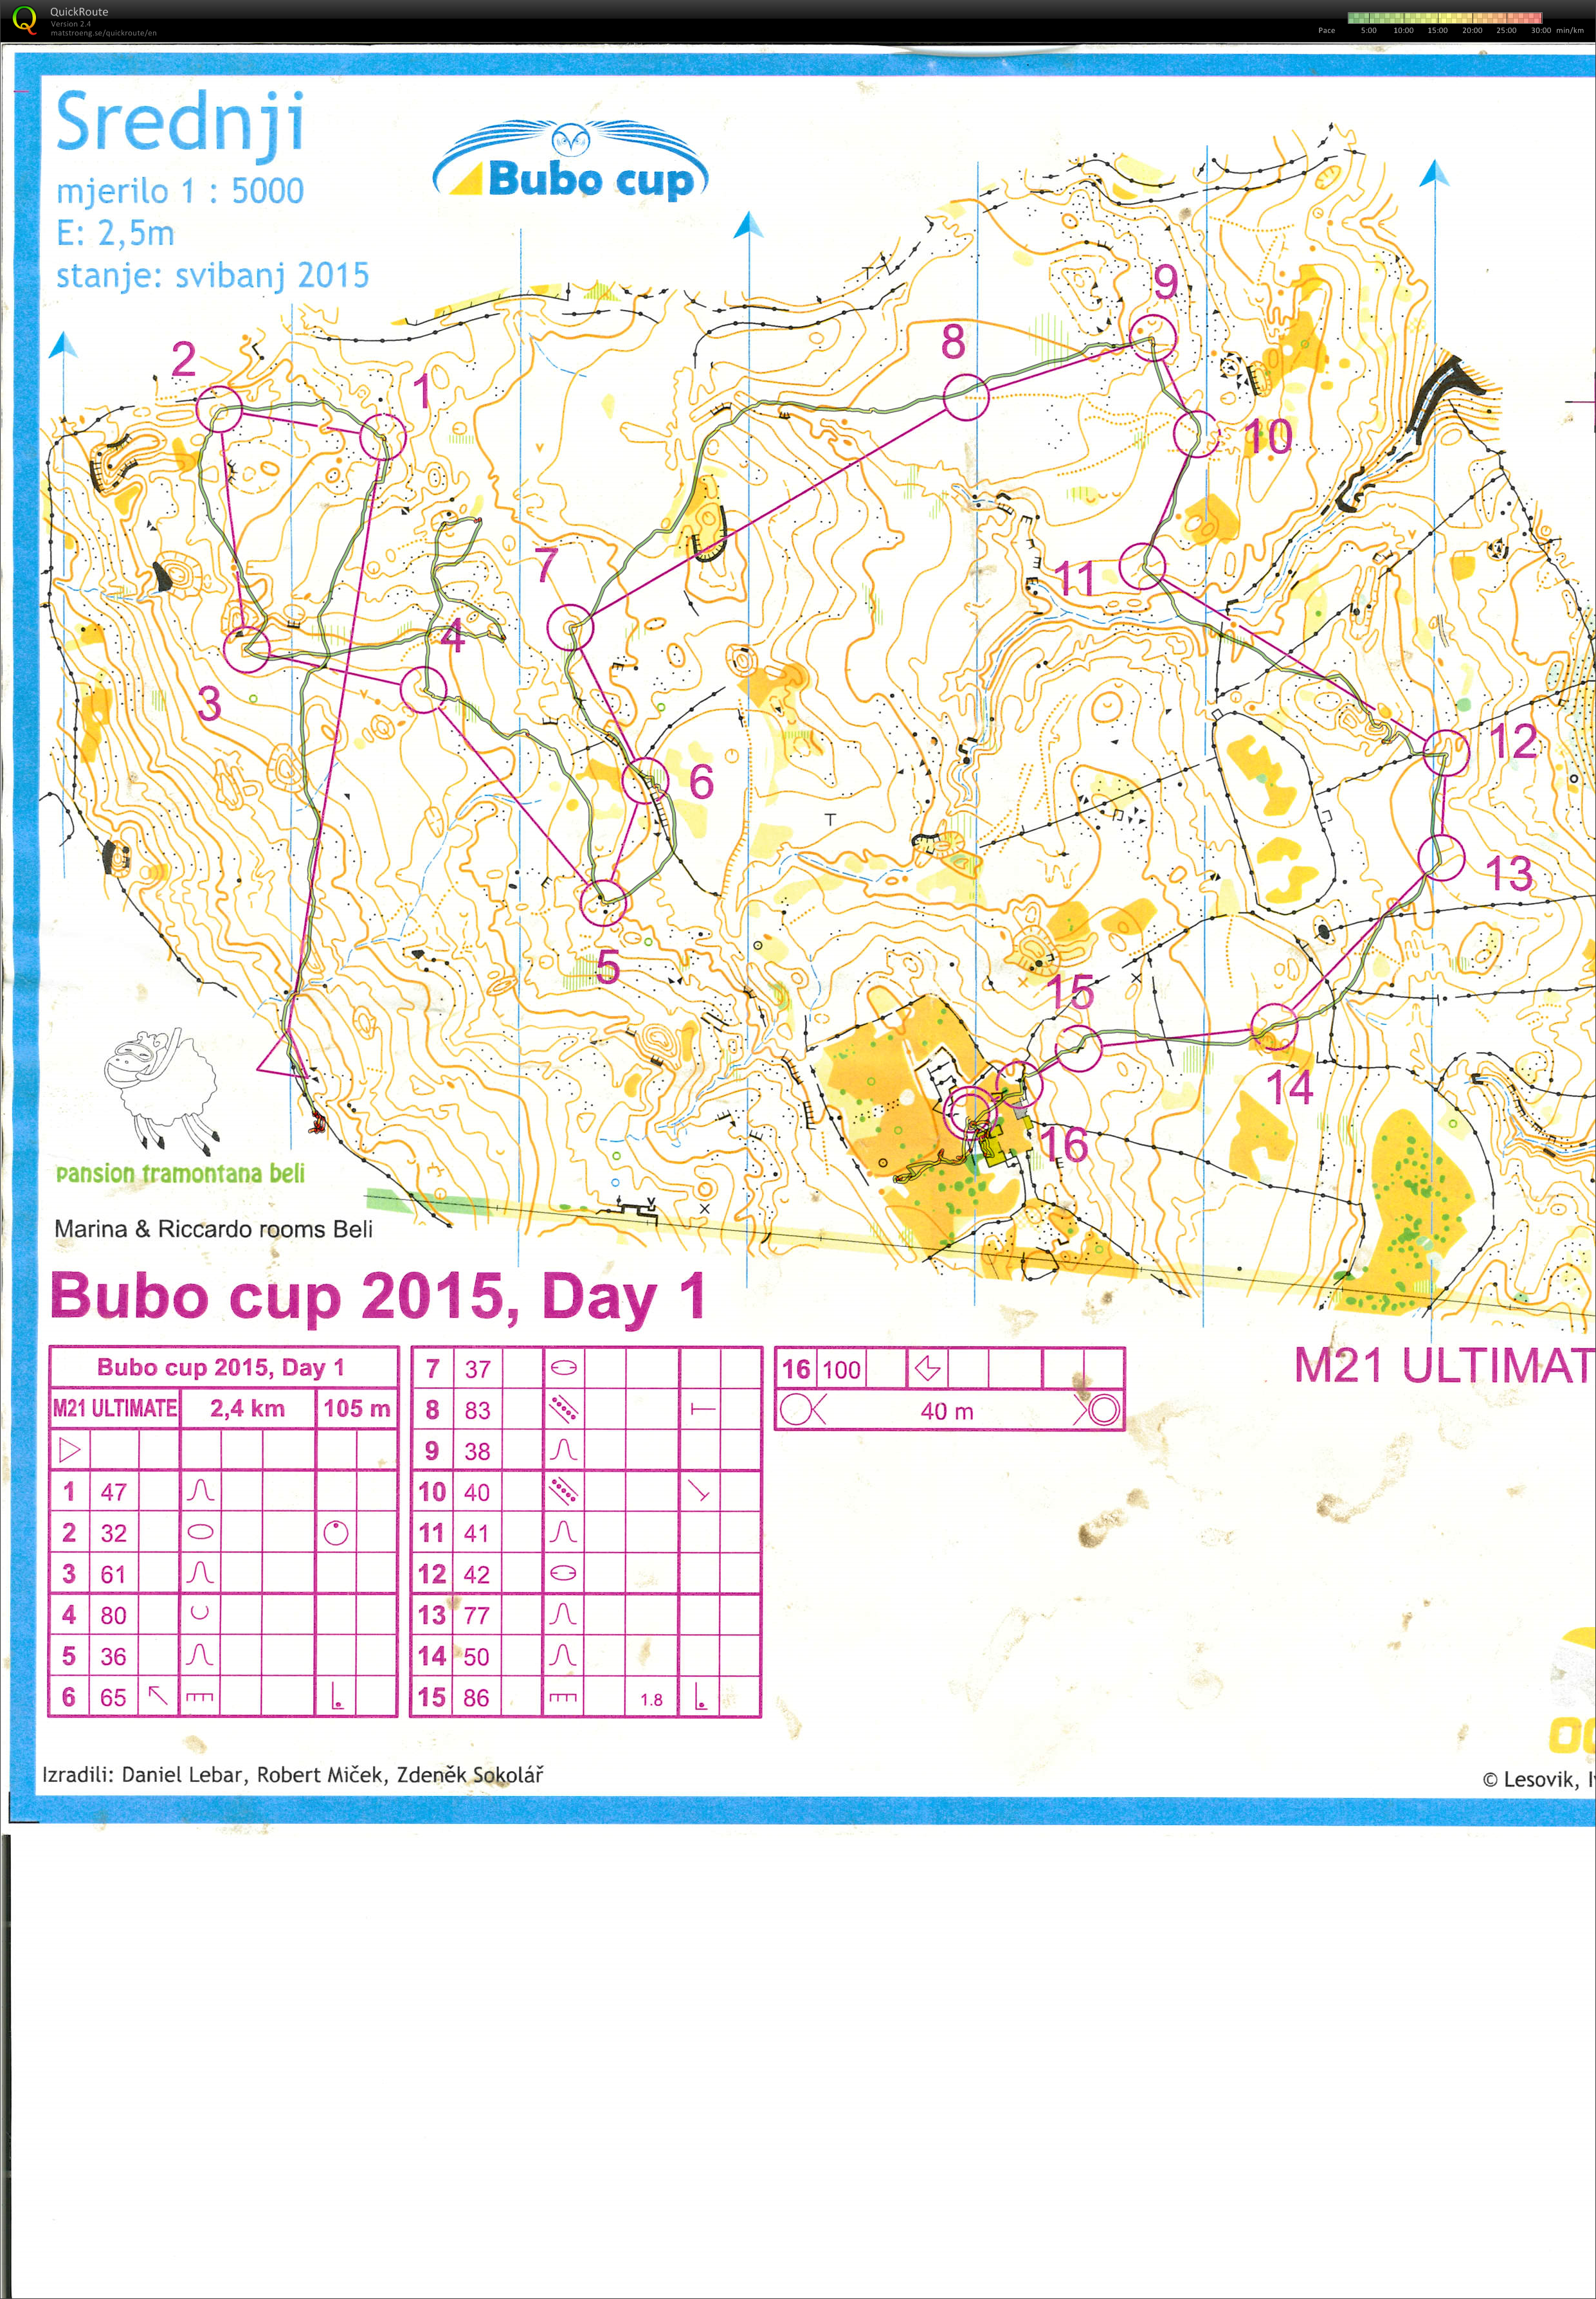 Bubocup 2015 Stage 1 (01.08.2015)